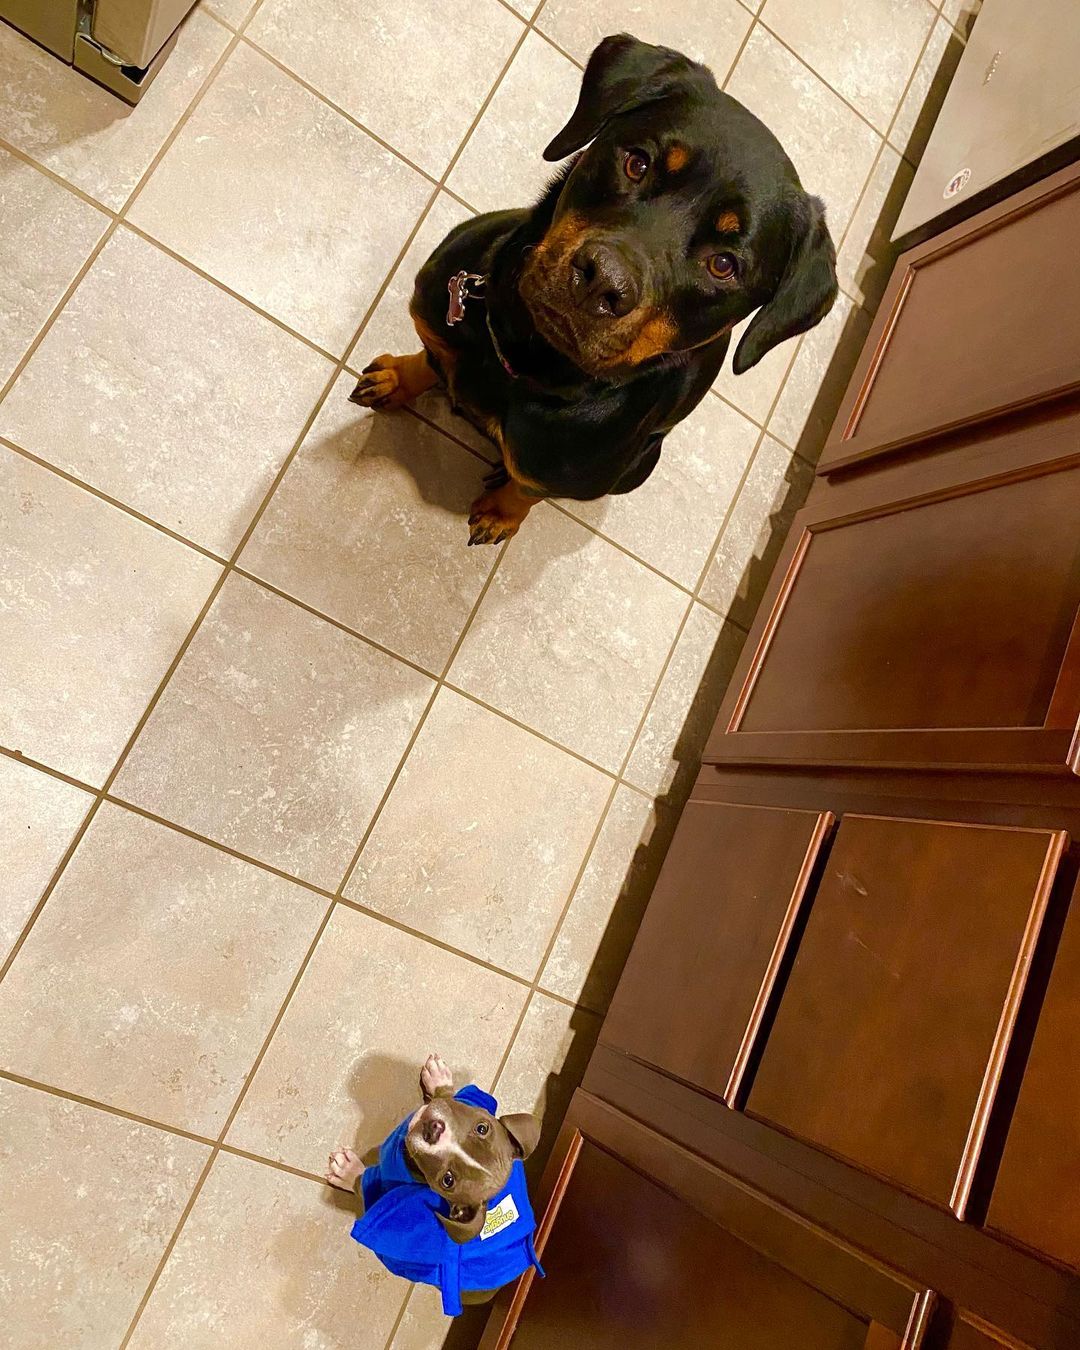 dog and puppy sitting on tile floor